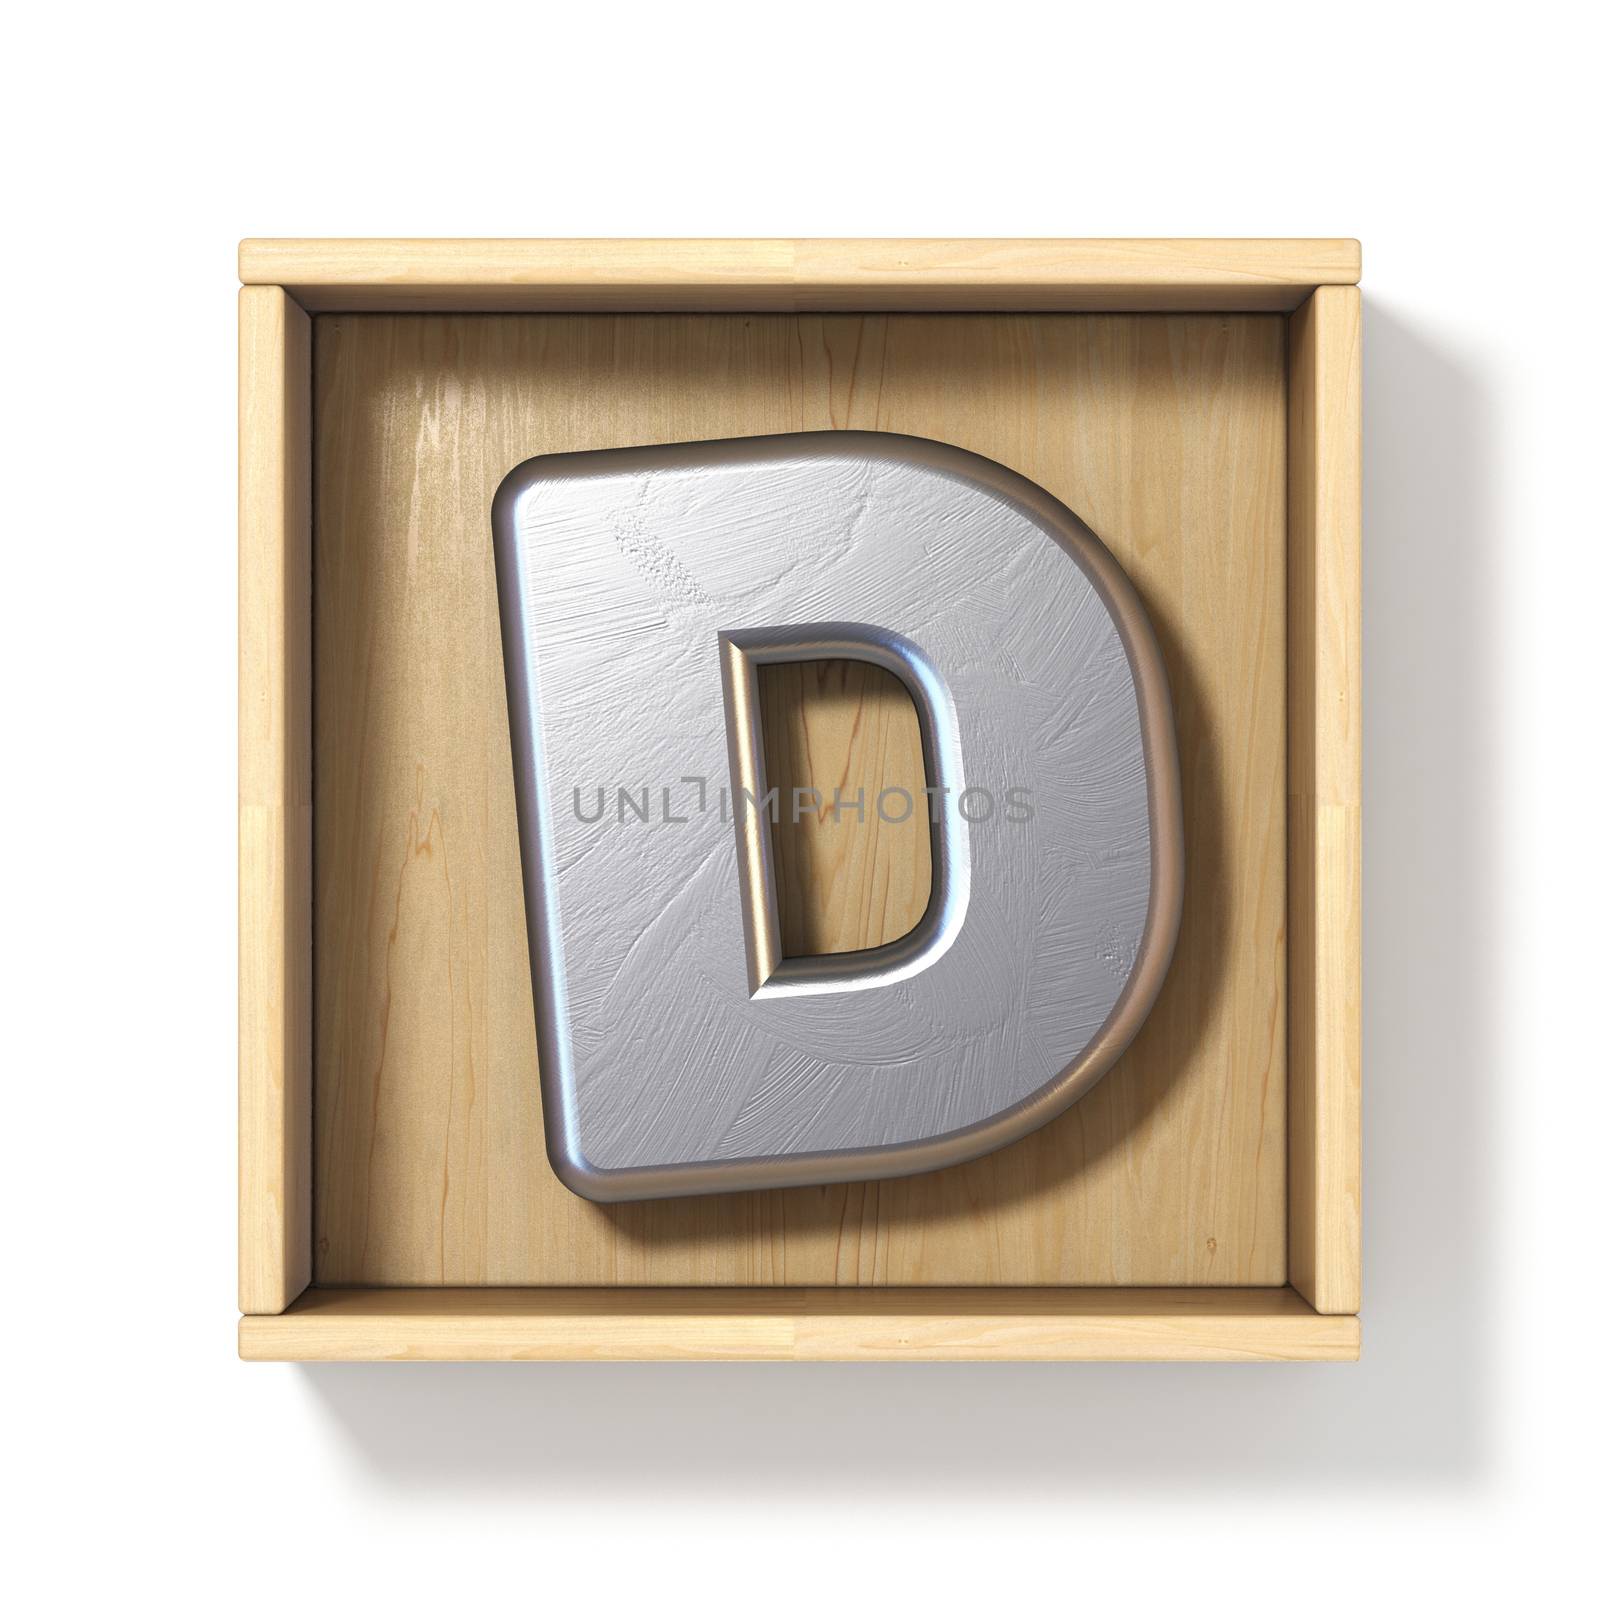 Silver metal letter D in wooden box 3D render illustration isolated on white background